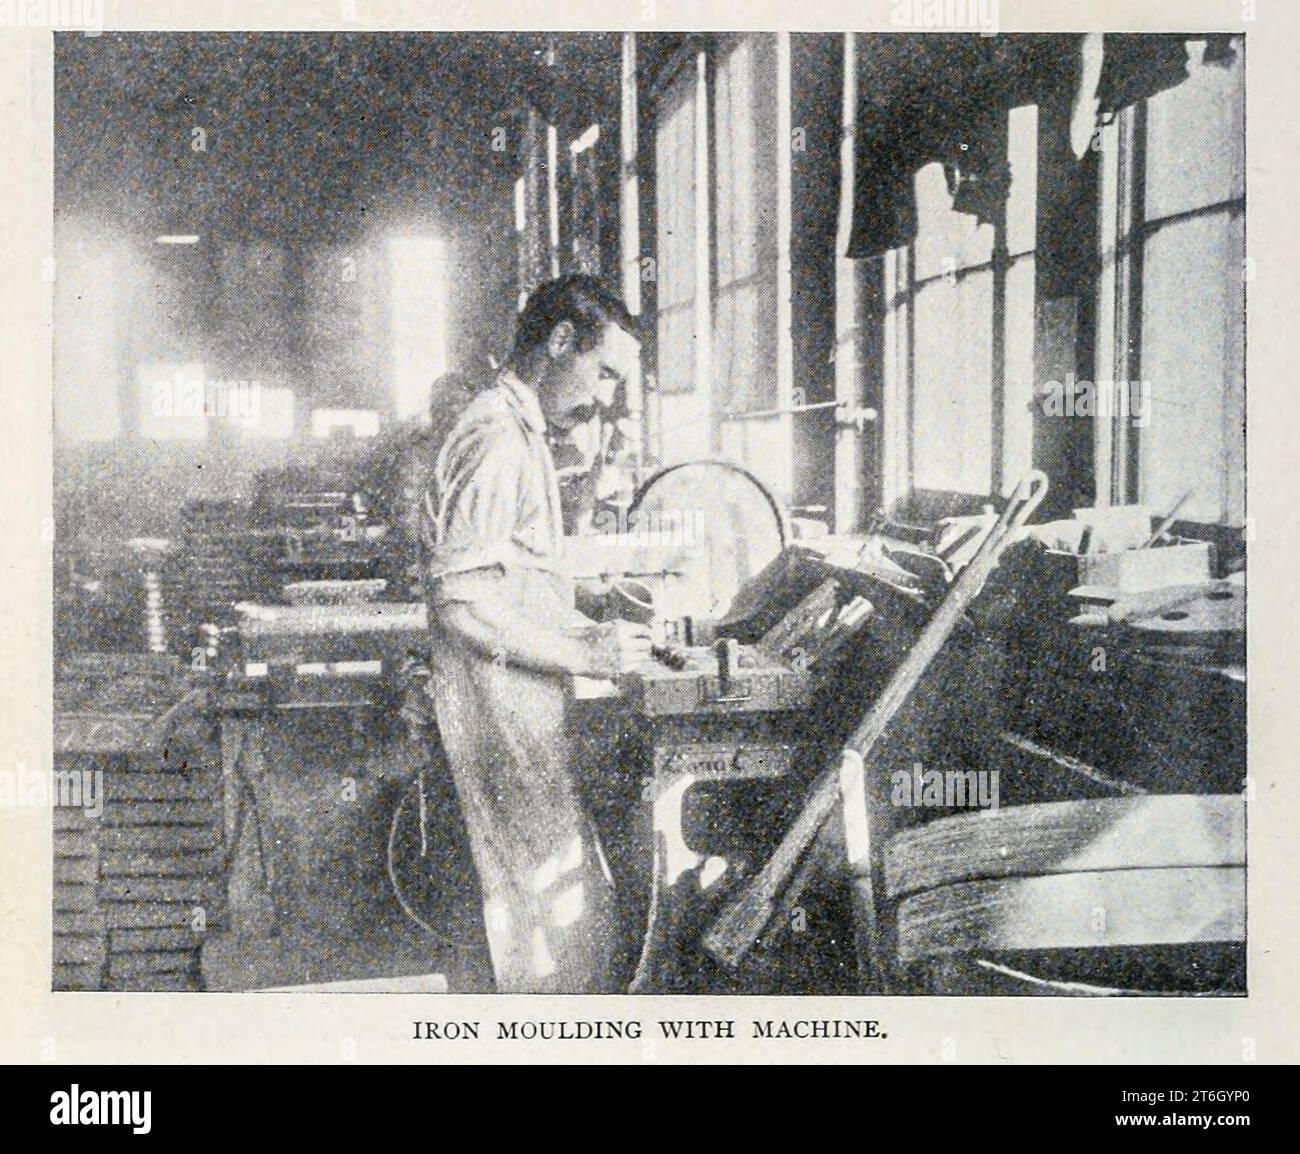 Iron Moulding with Machine The Yale & Towne Lock Manufacturing Company Shelbume Falls, Massachusetts from the Article SIX EXAMPLES OF SUCCESSFUL SHOP MANAGEMENT. Part III By Henry Roland. from The Engineering Magazine DEVOTED TO INDUSTRIAL PROGRESS Volume XII October 1896 to March 1897 The Engineering Magazine Co Stock Photo